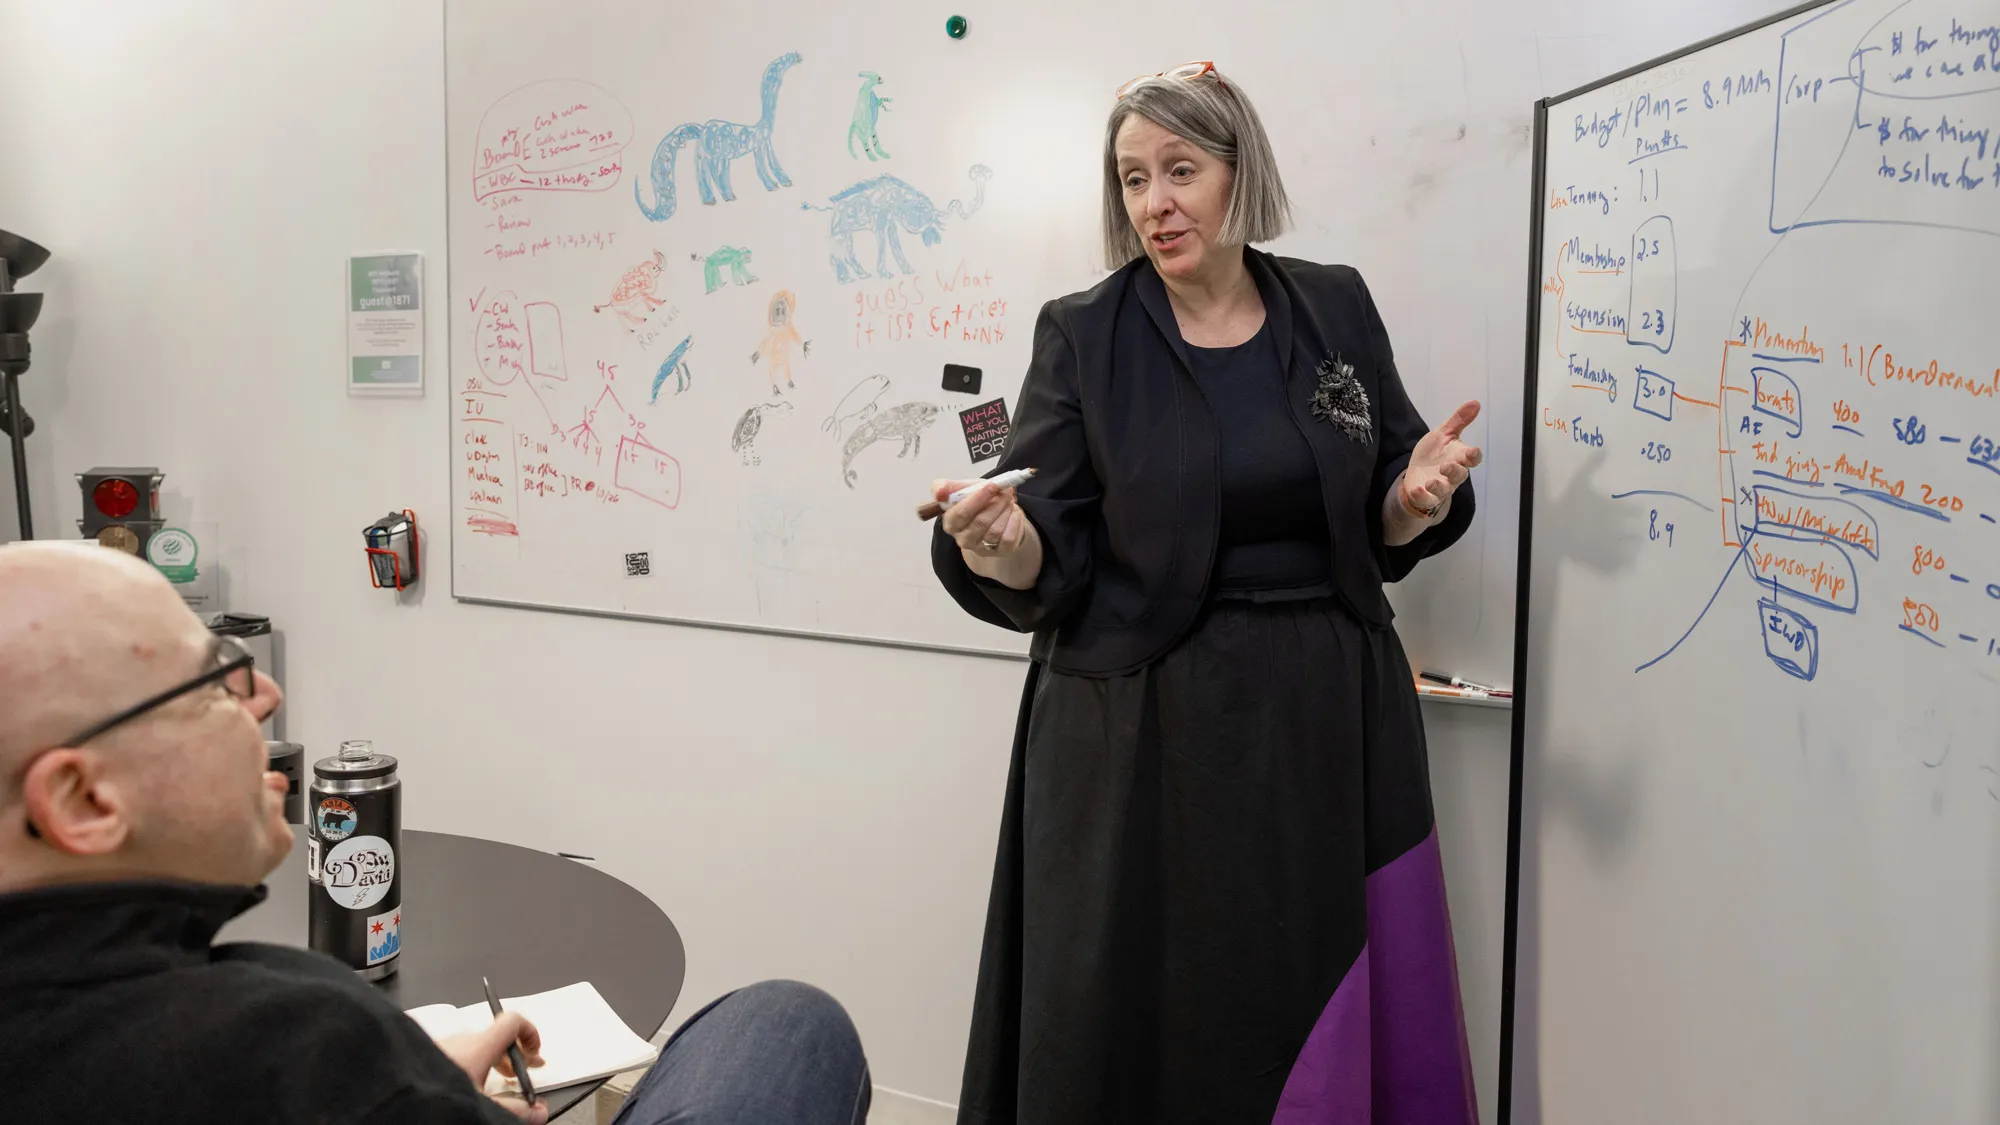 Betsy stands in her office next to a white board, holding an uncapped marker and explaining a point to a man seated at the table in front of her. They’re both smiling as they talk. In the background, another white board has animals and dinosaurs drawn on it (seemingly by a child) next to notes.